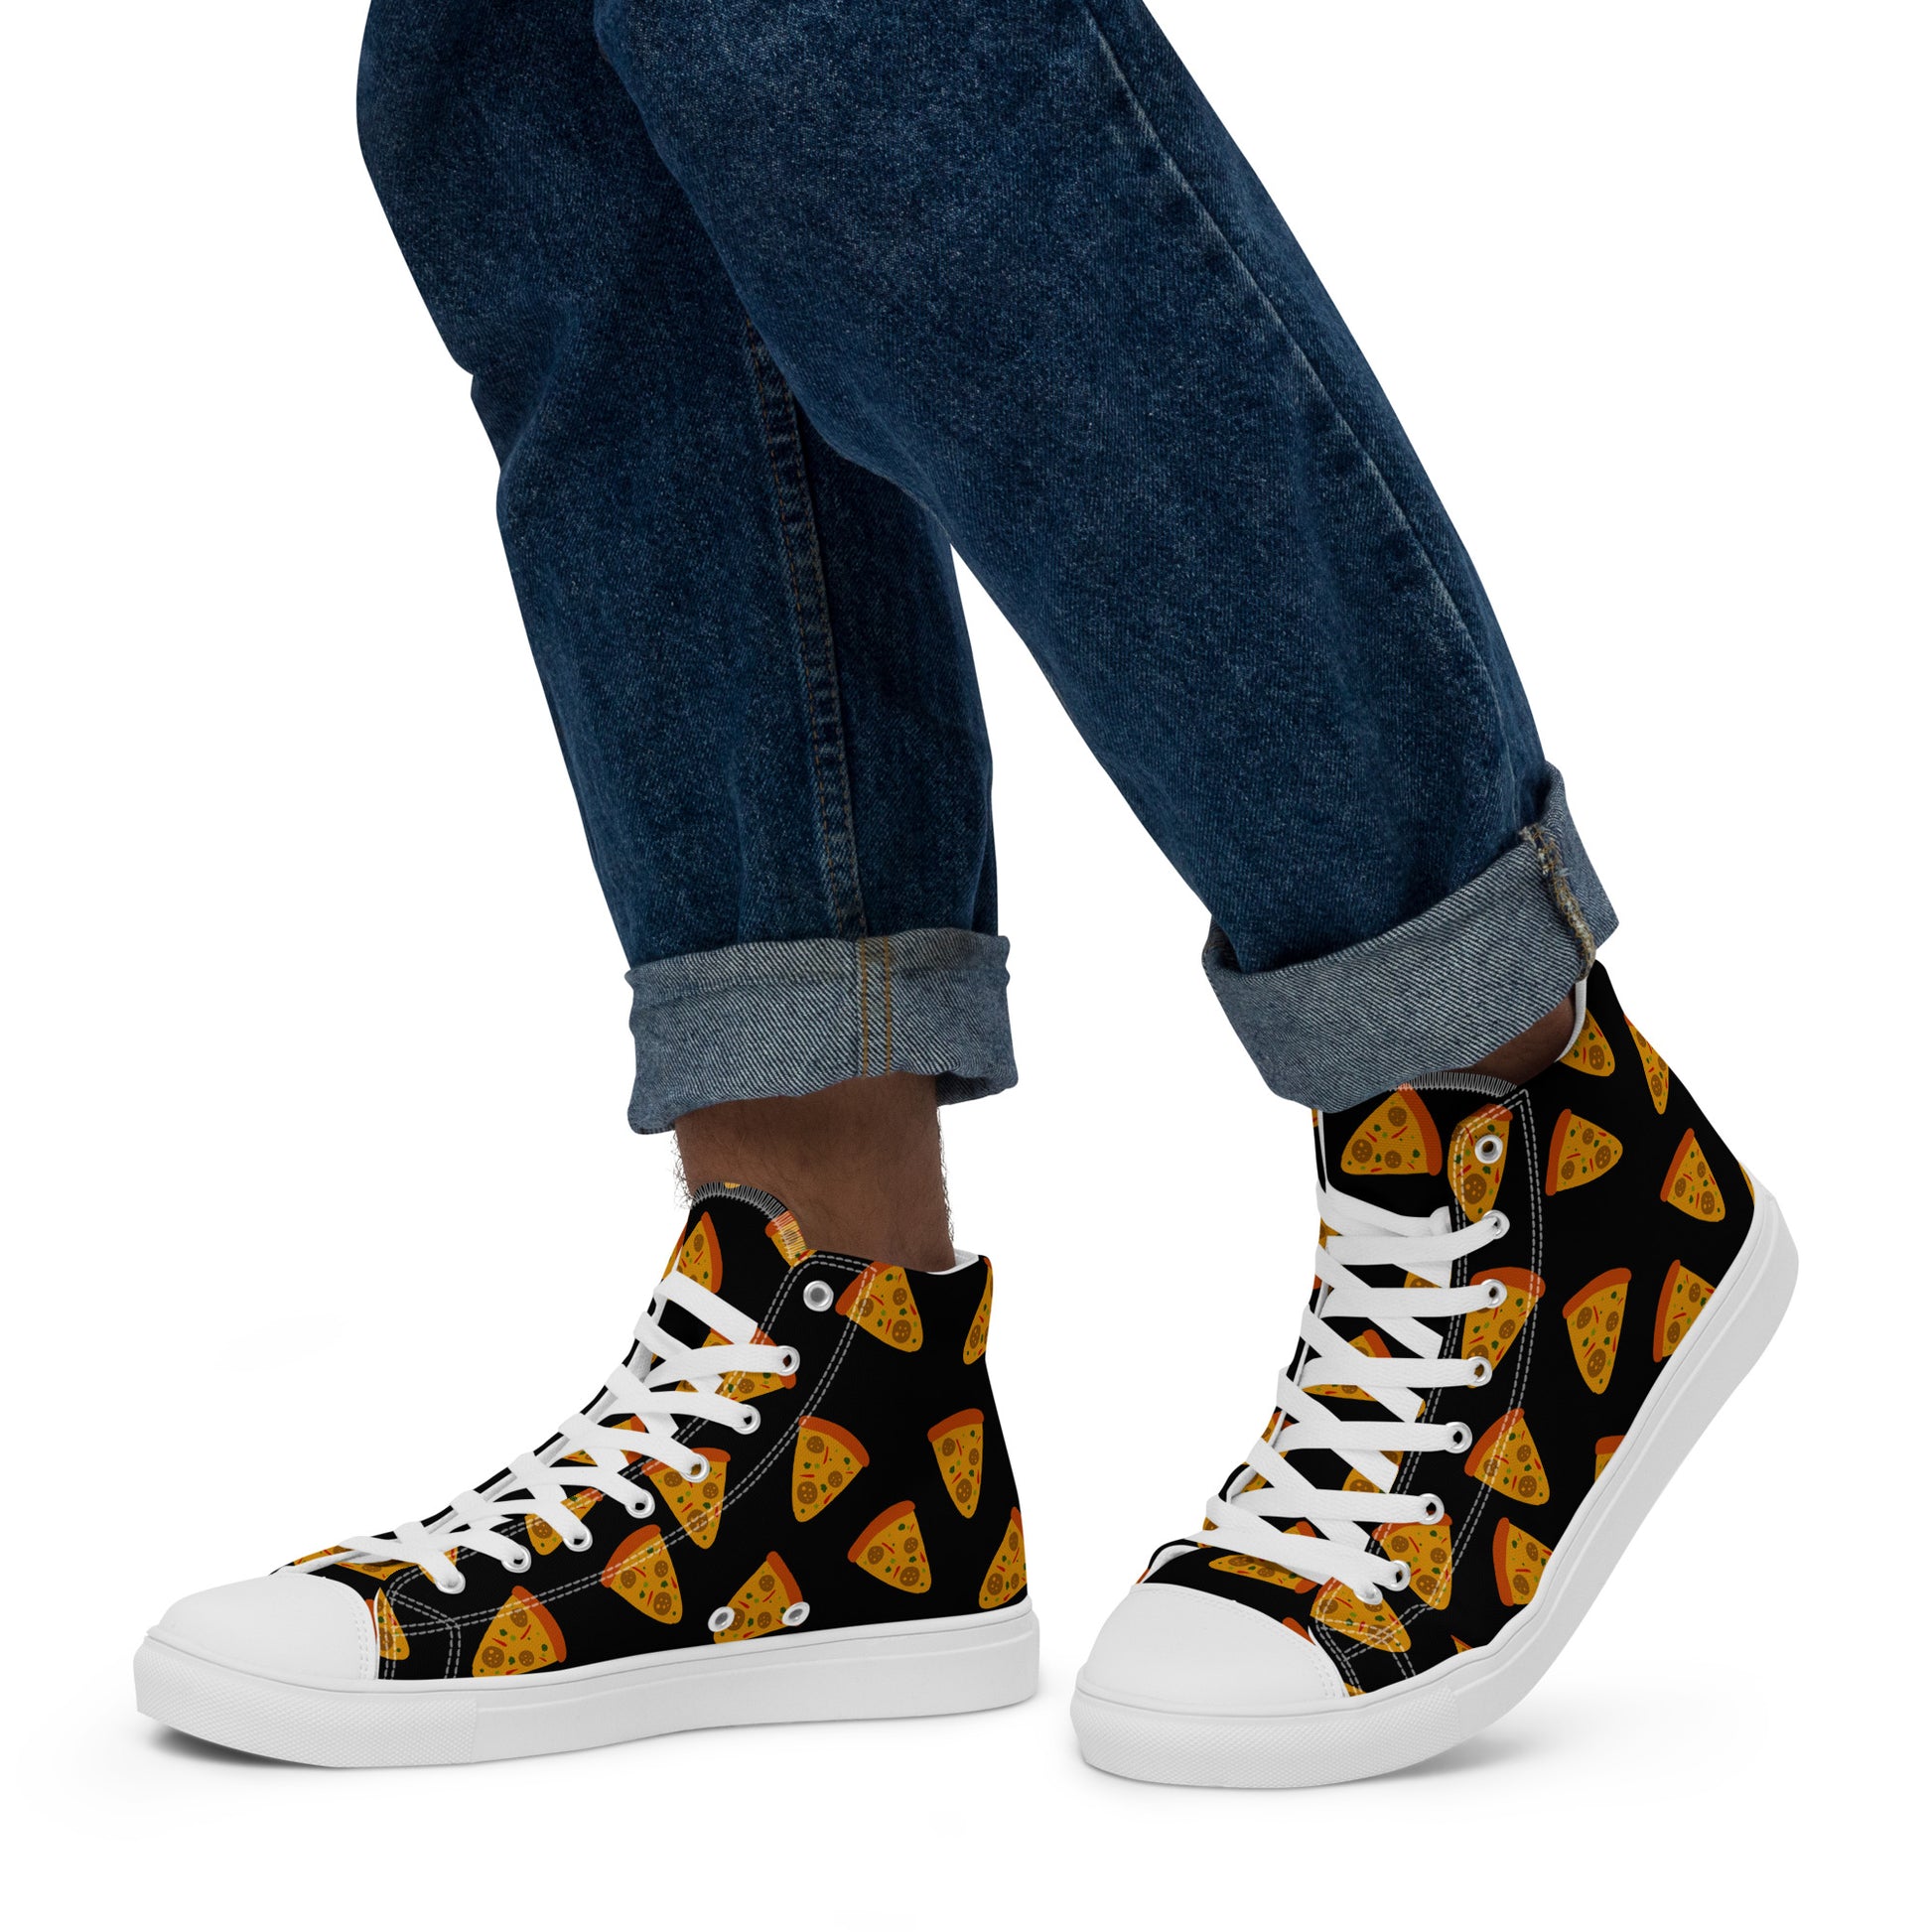 Pizzas - Men’s high top canvas shoes White Mens High Top Shoes food